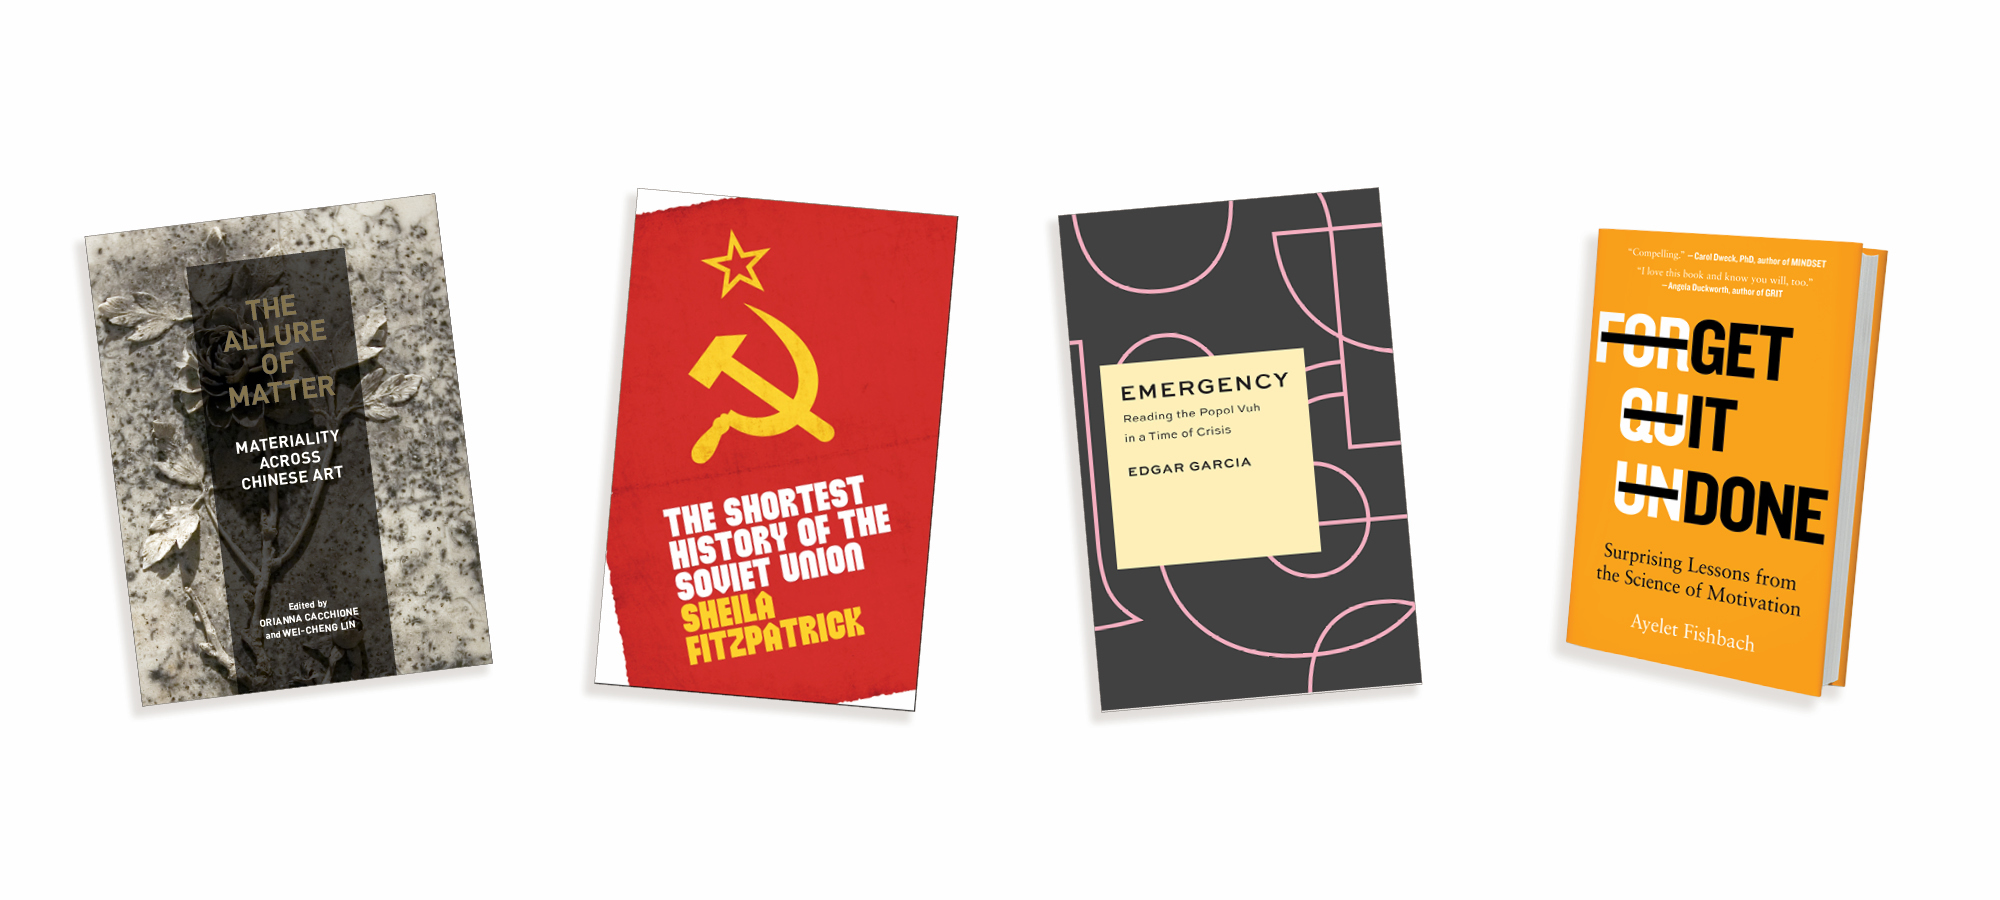 Book covers for “The Allure of Matter,” “The Shortest History of the Soviet Union,” “Emergency,” and “Get It Done”